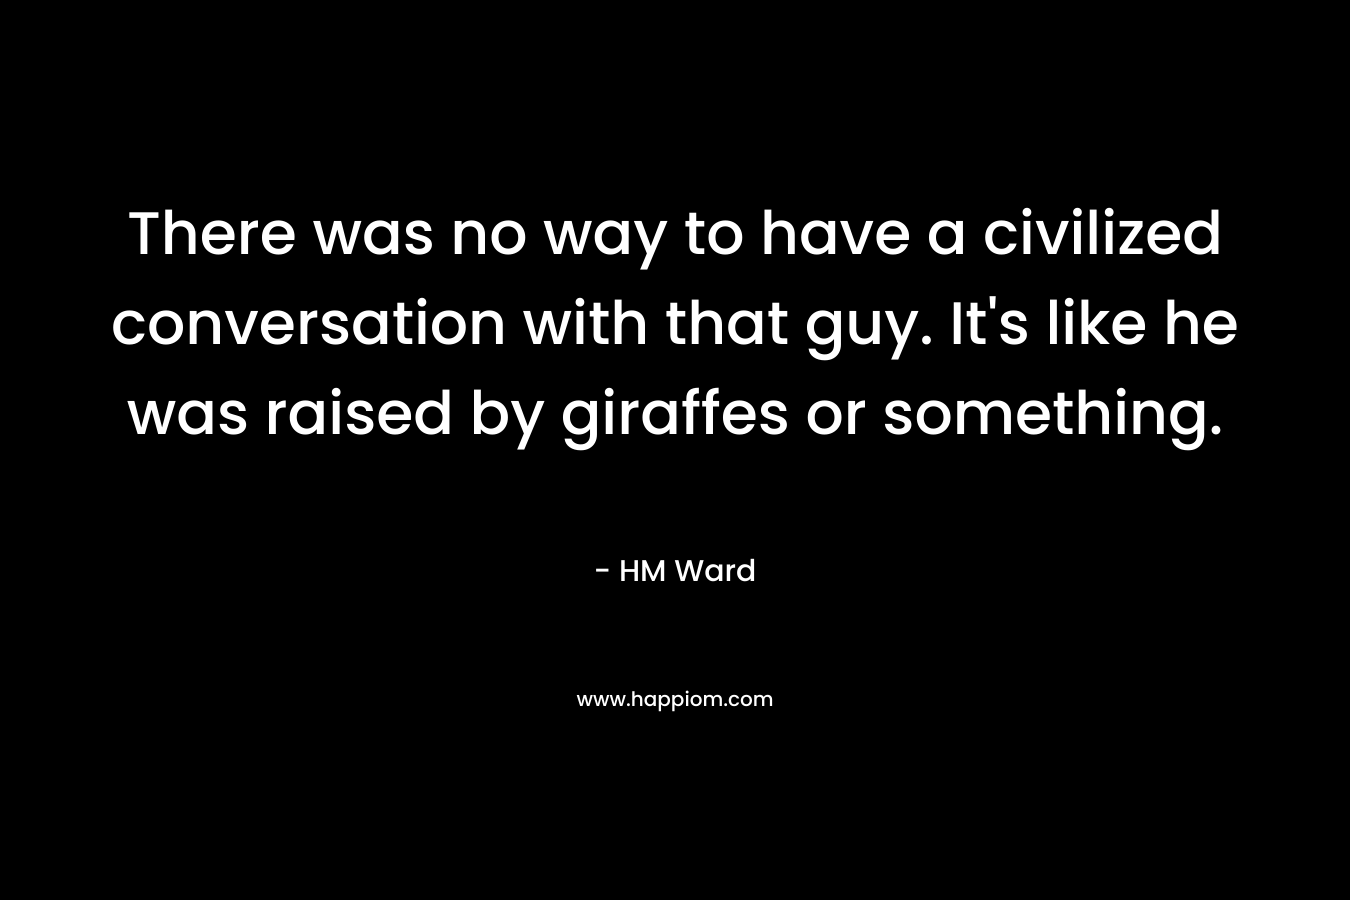 There was no way to have a civilized conversation with that guy. It’s like he was raised by giraffes or something. – HM Ward